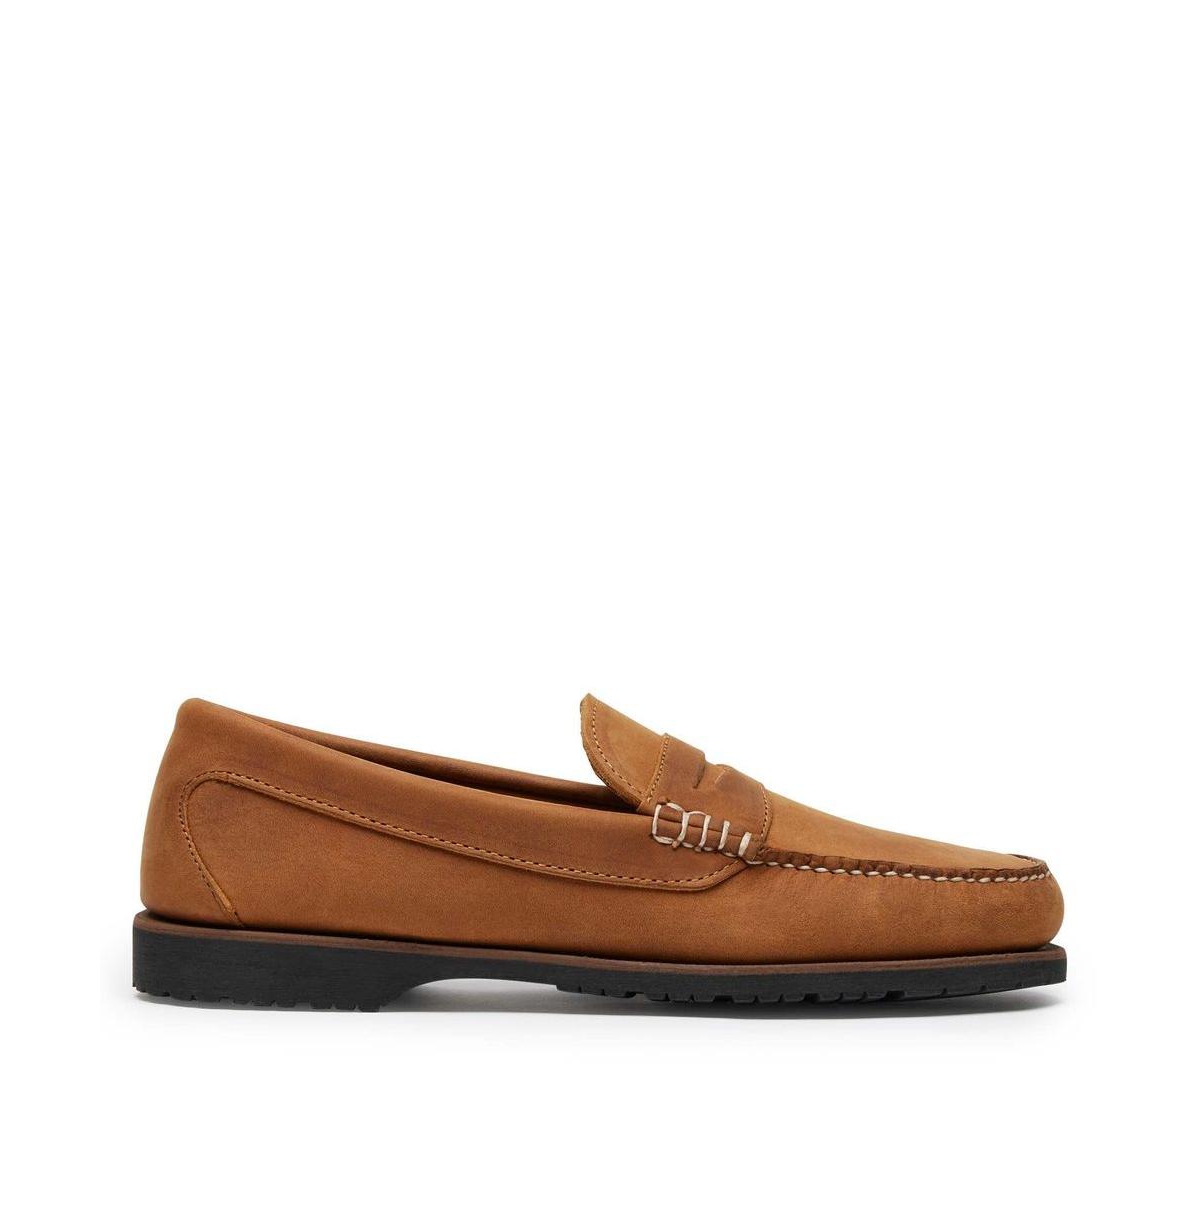 Men's Rover Penny Loafer - Capetown trail